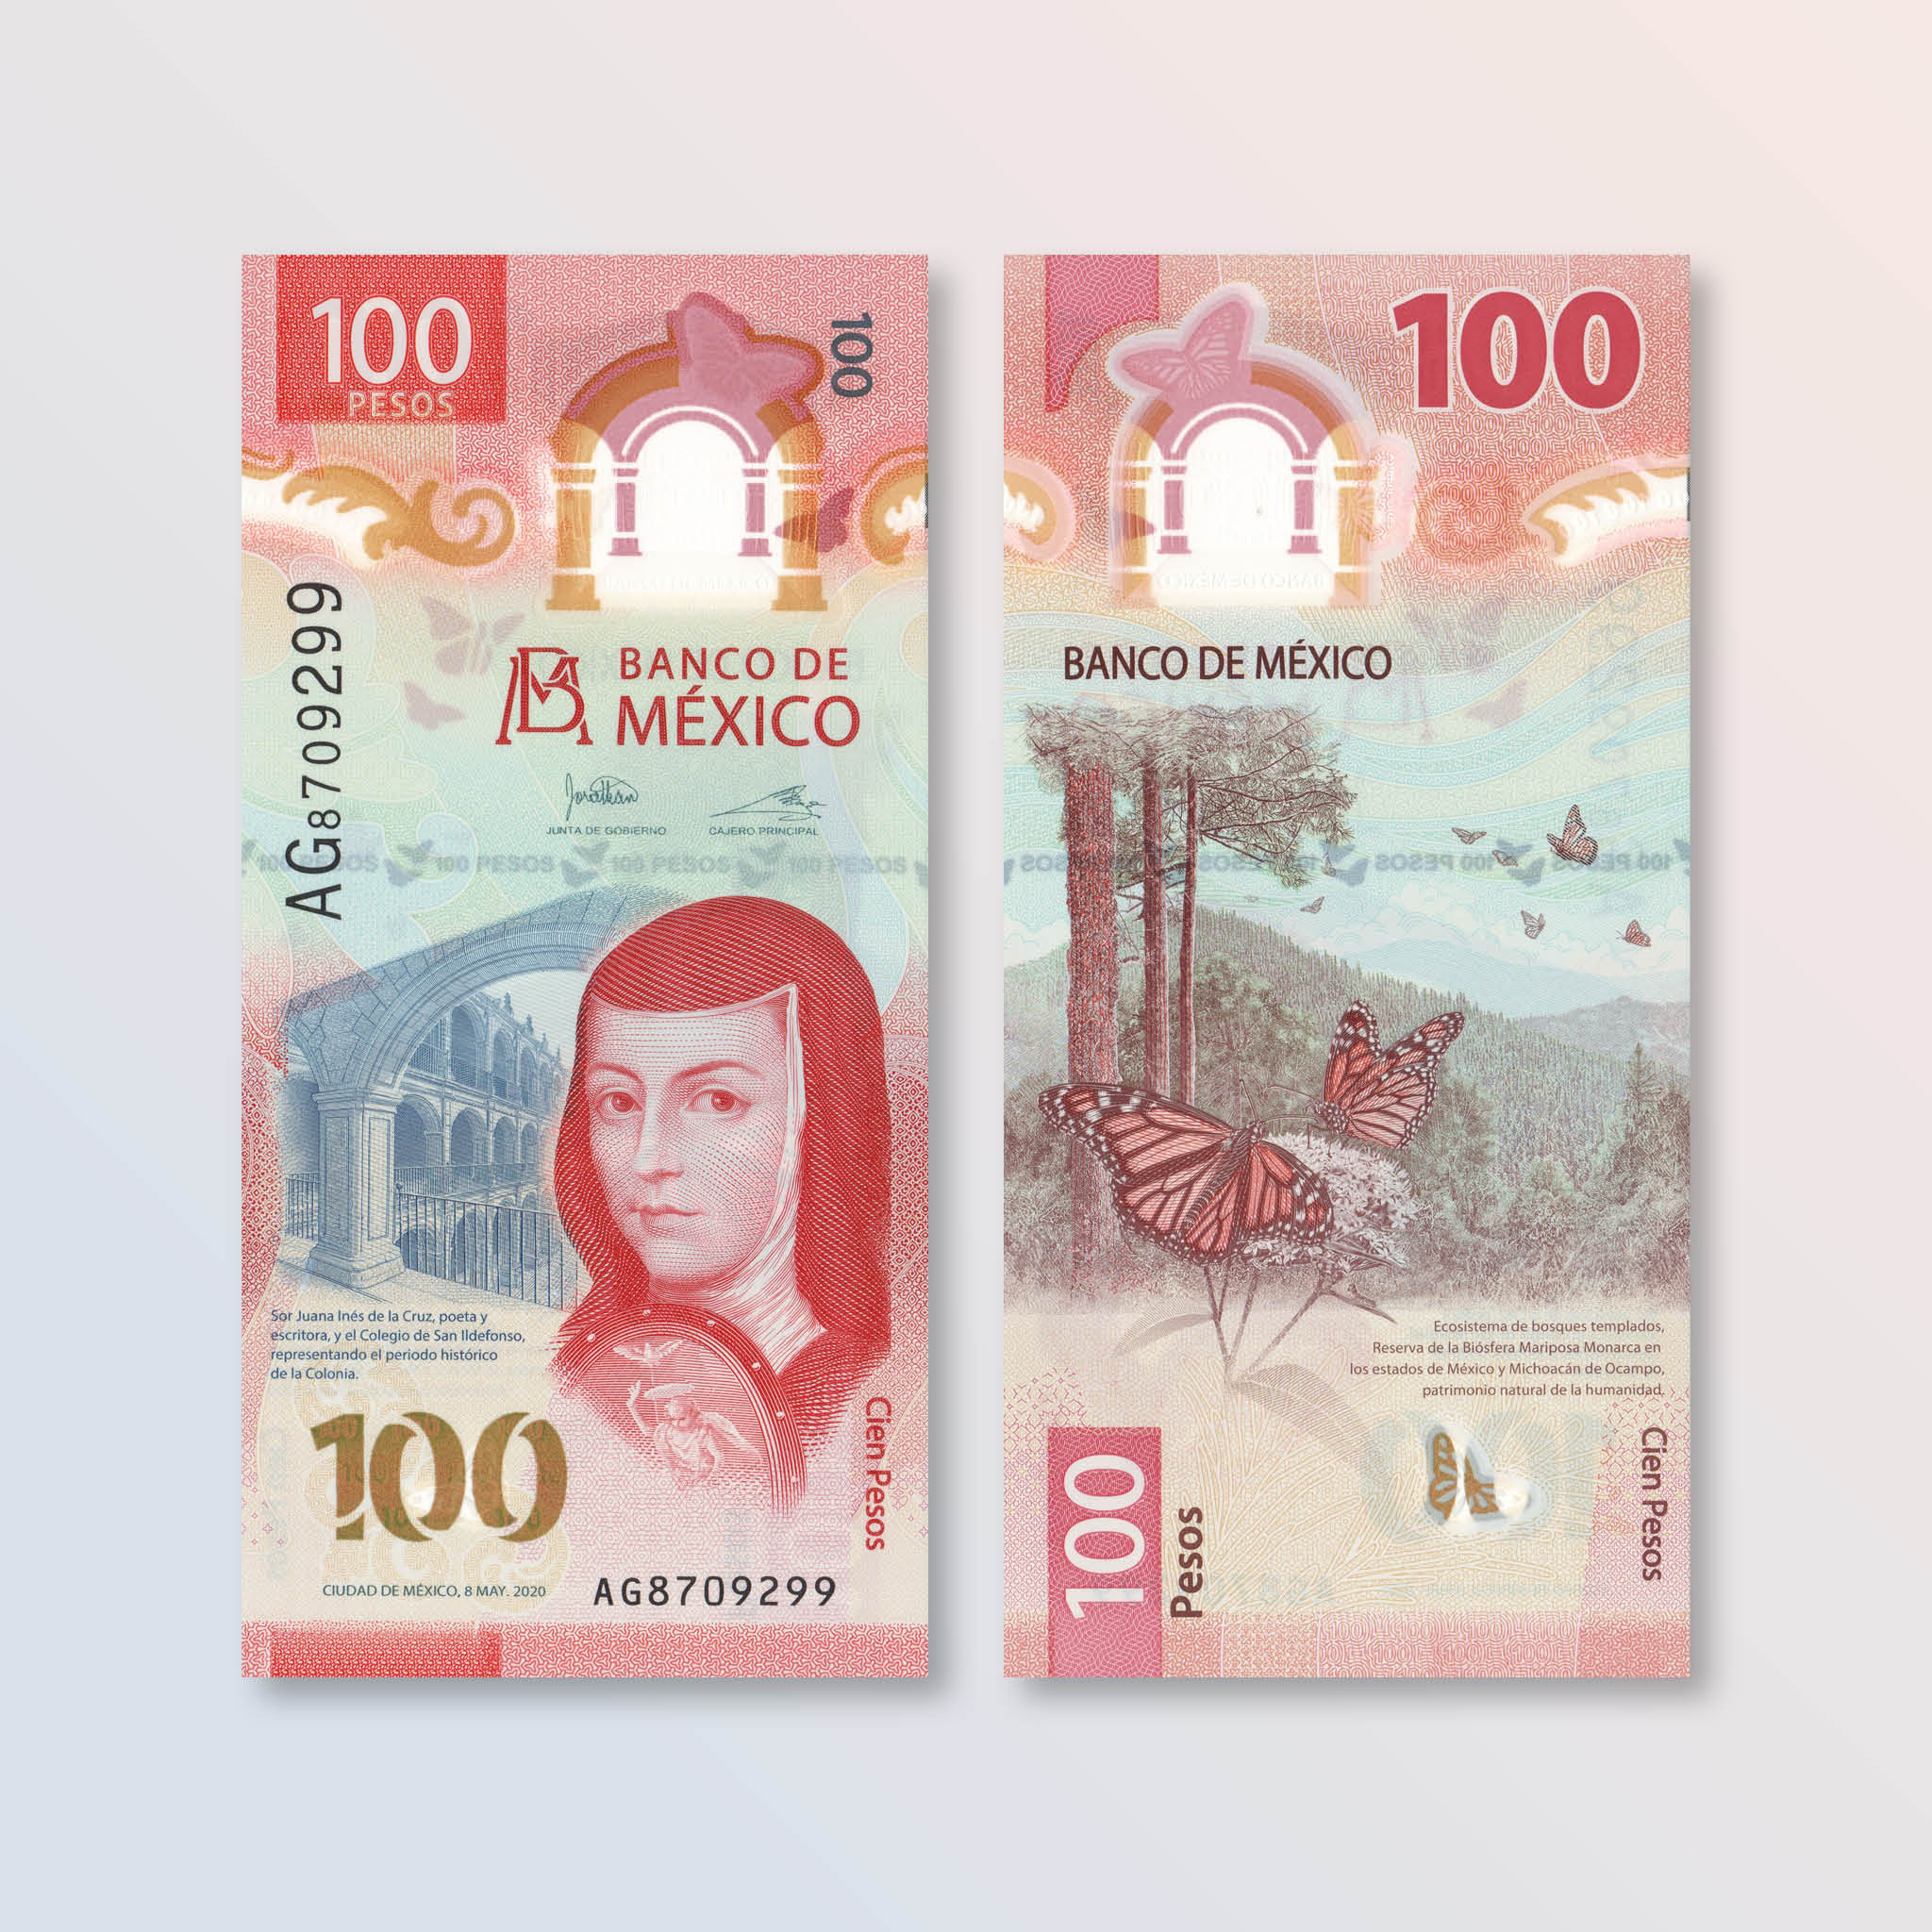 Mexico 100 Pesos, 2020, B715a, IBNS Banknote of the Year 2020, UNC - Robert's World Money - World Banknotes